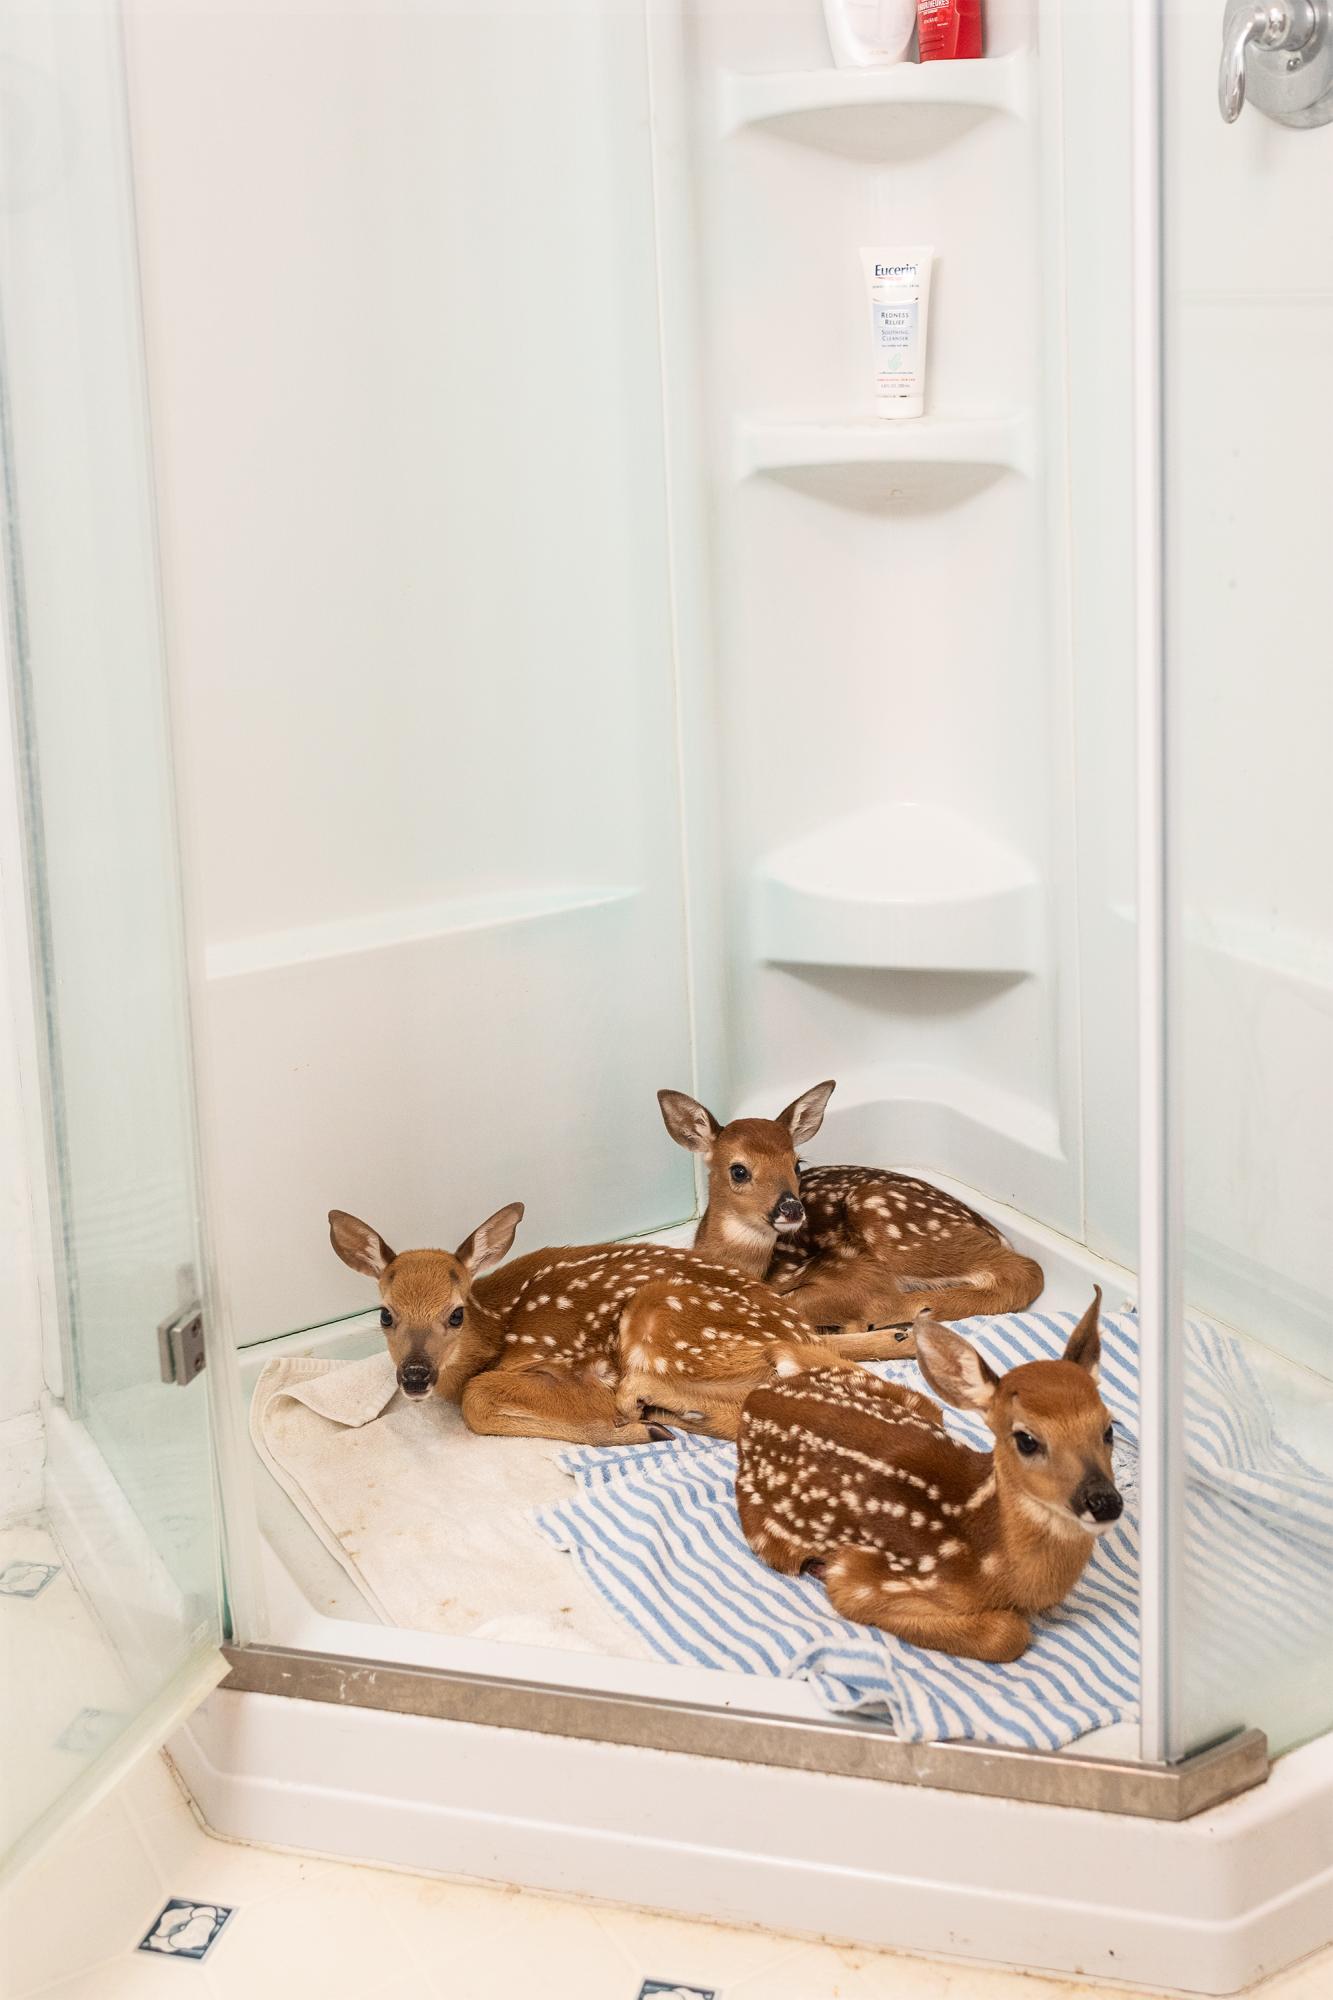 It Takes a Village - Fawns shelter overnight from predators in a...